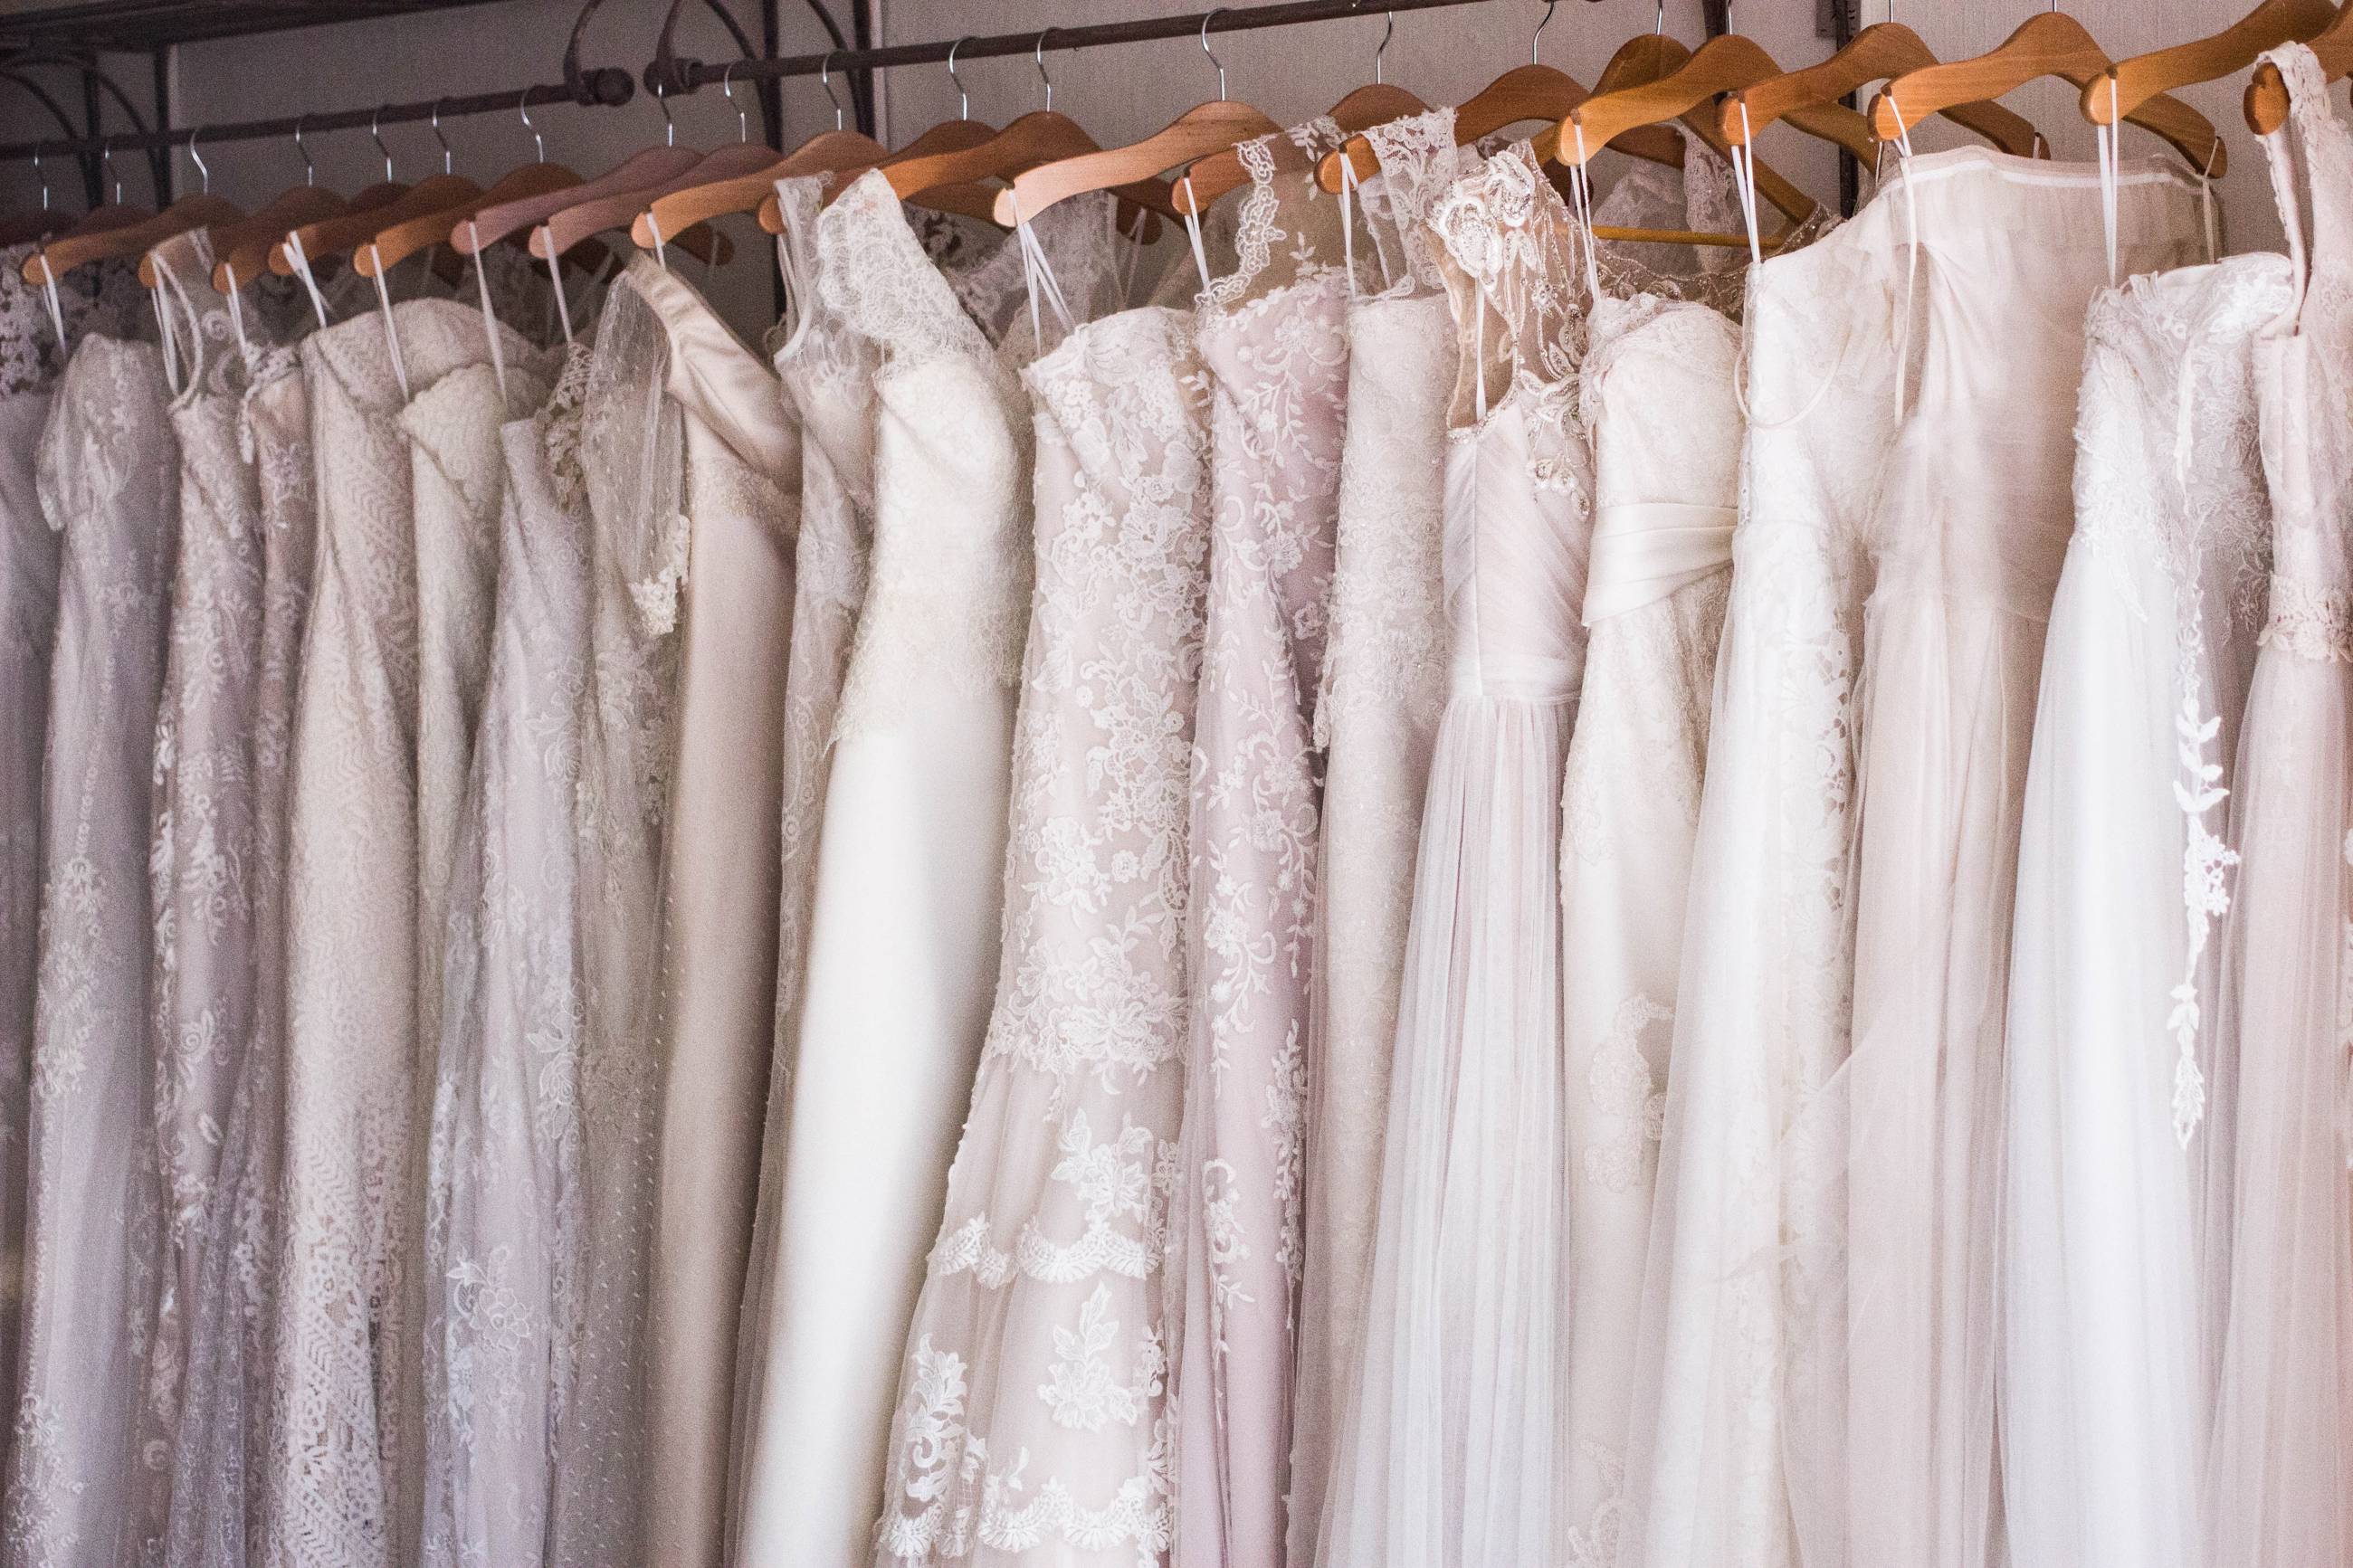 5 Misconceptions About Dress Shopping Image